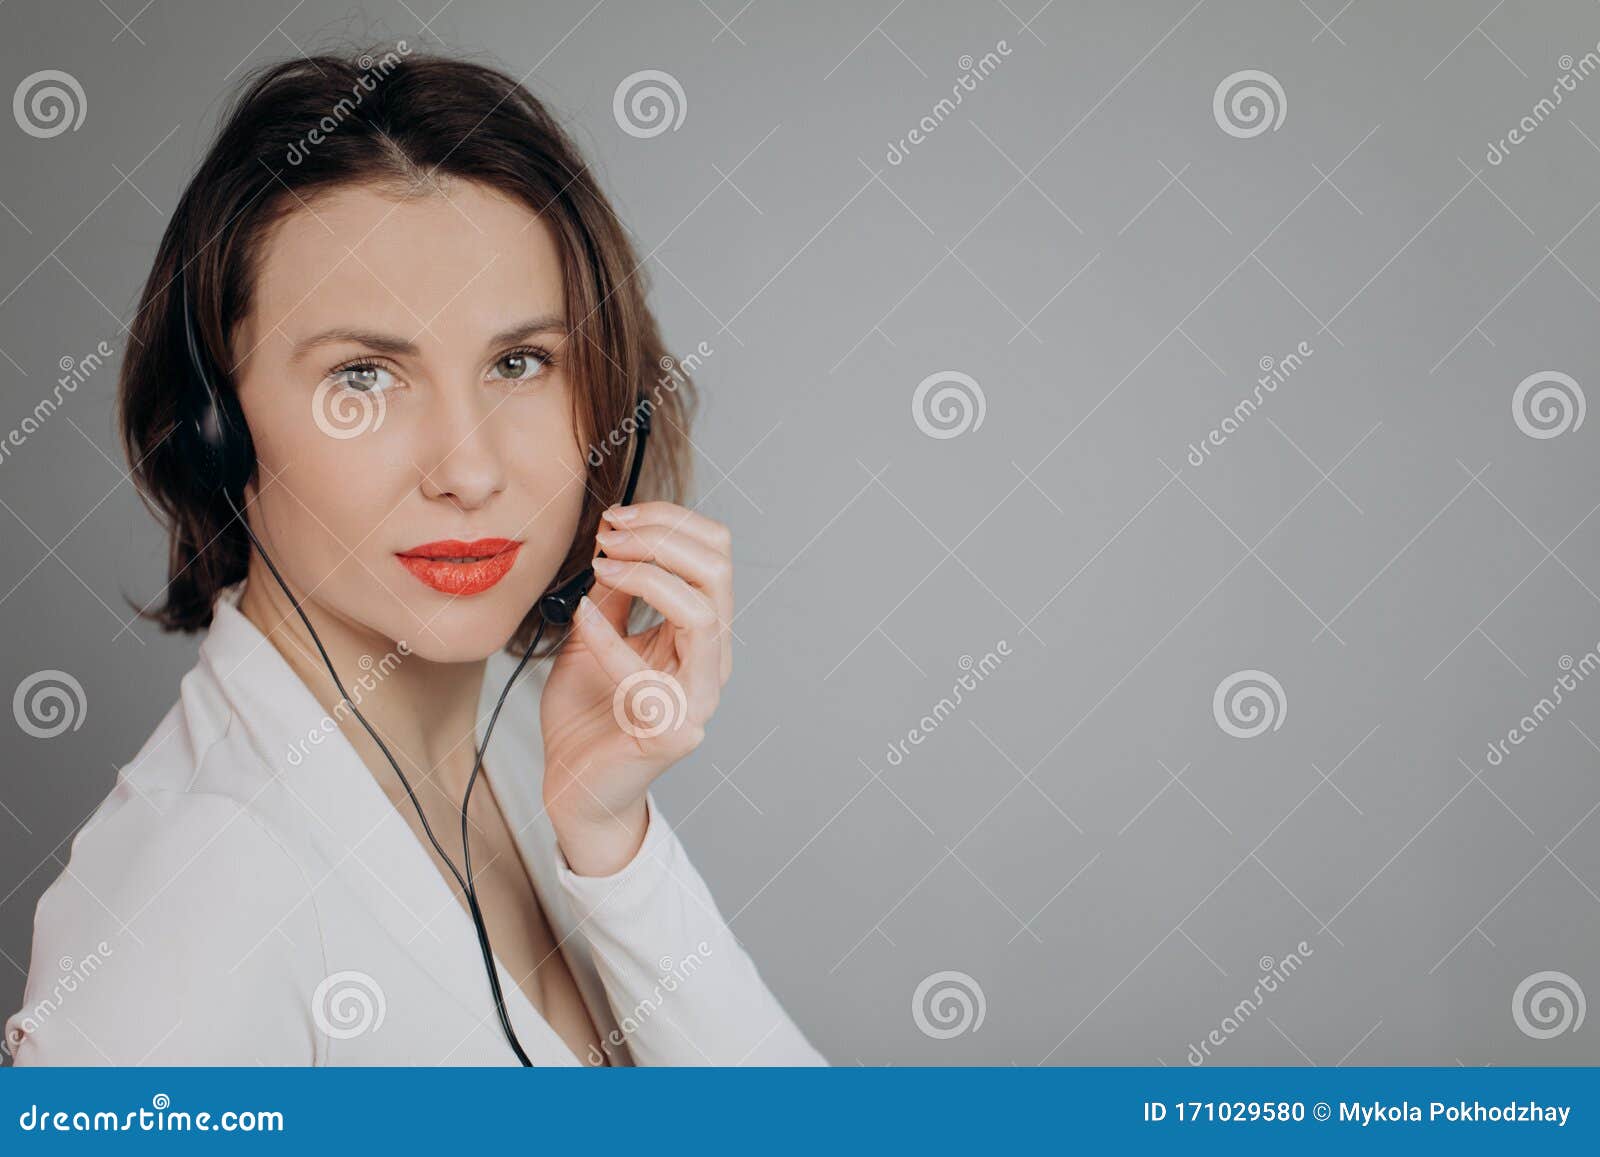 Support Phone Operator in Headset Using Personal Computer. Agent Woman ...